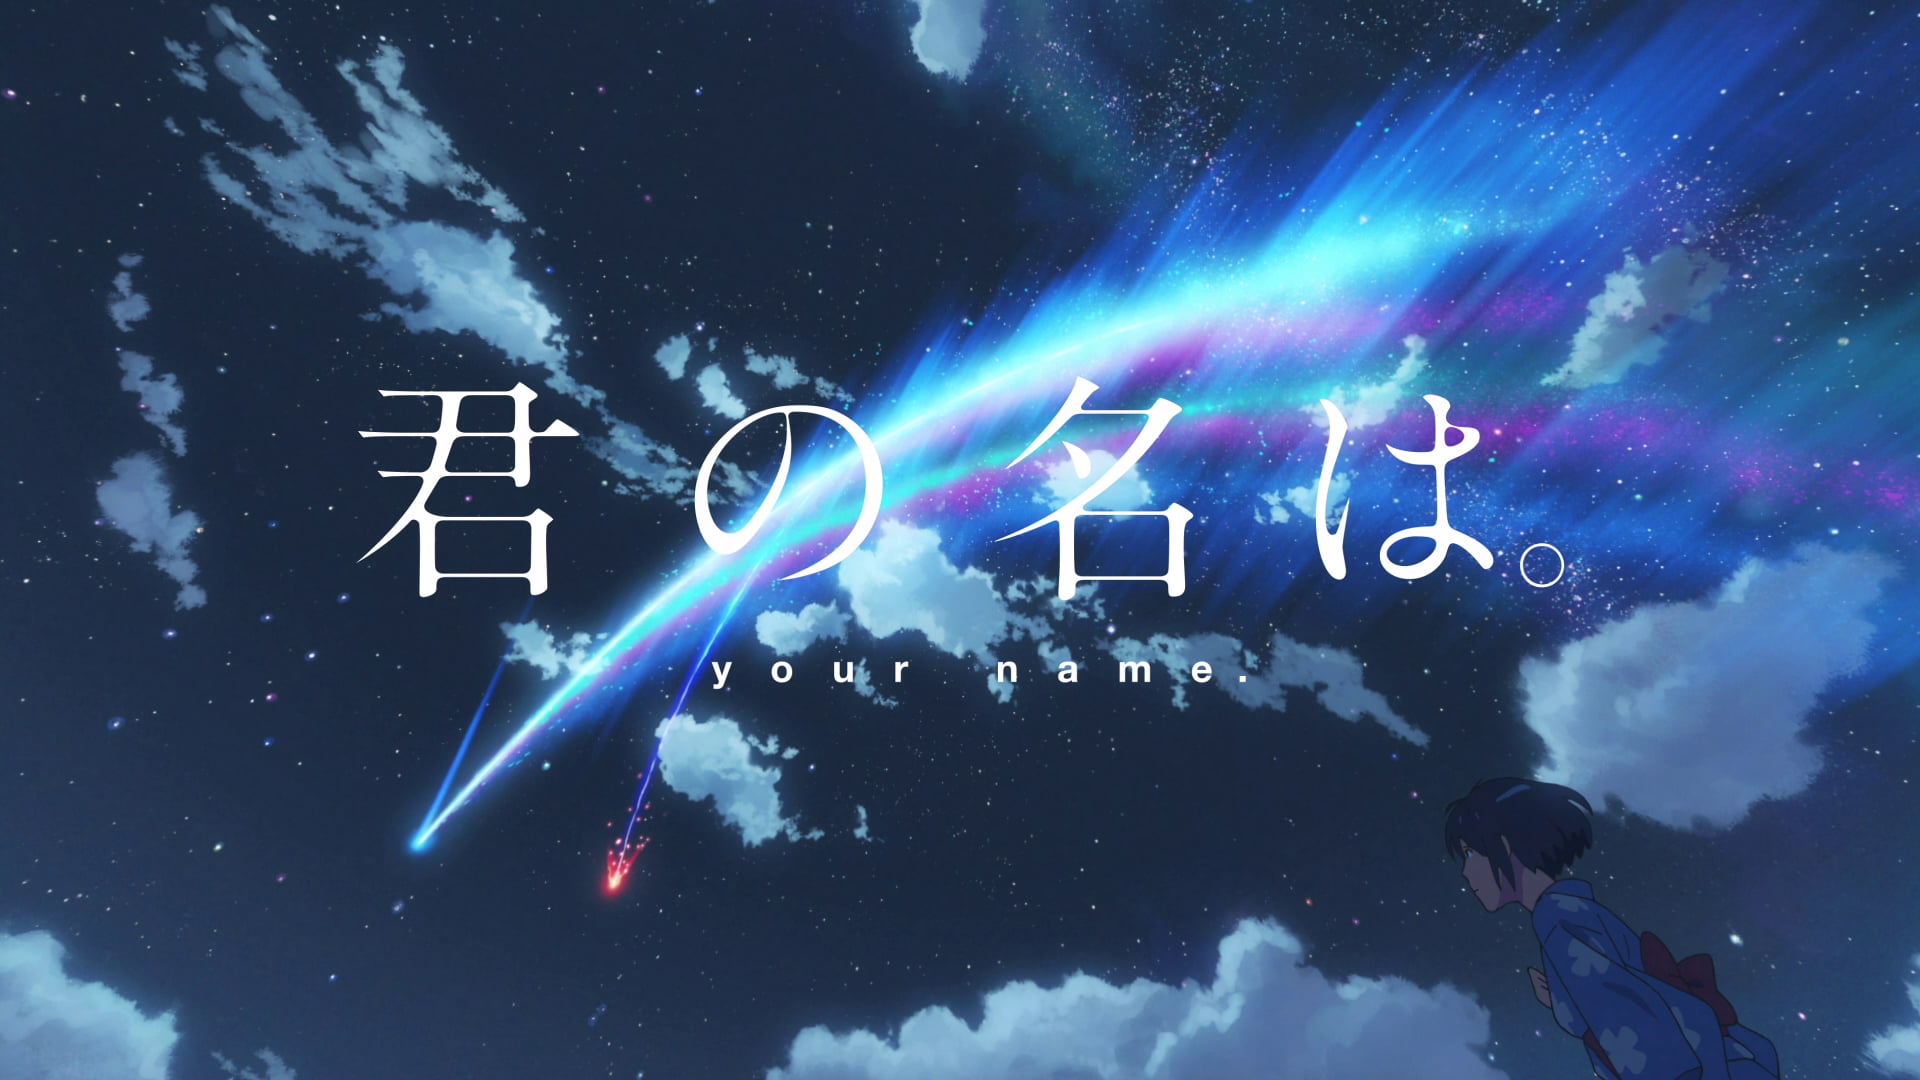 Your Name Movie Wallpaper Kimi No Na Wa Your Name Title Star Trails Hd Wallpaper Wallpaper Flare